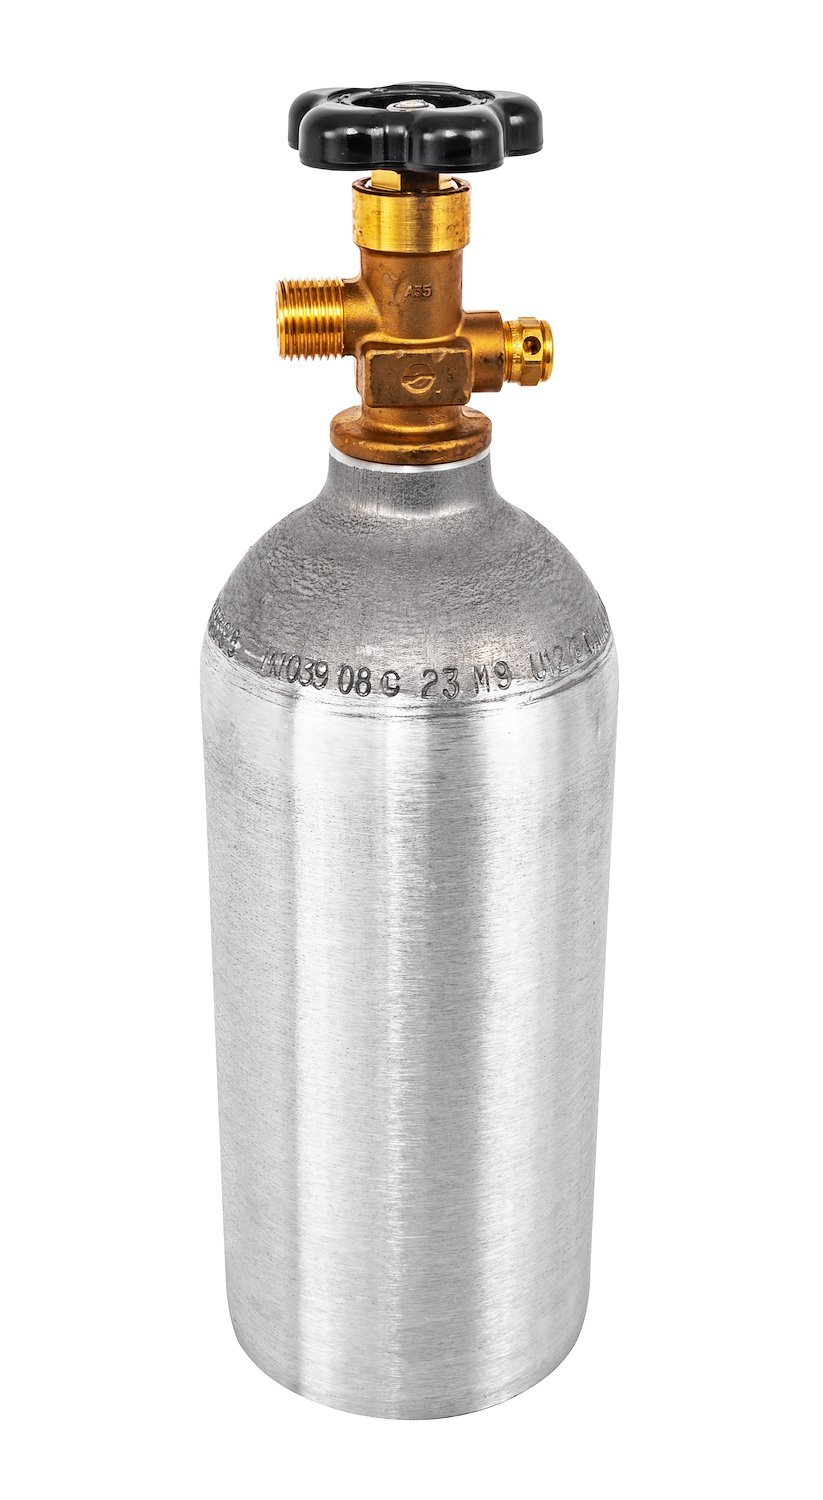 CO2 Bottle with Valve Length: 14